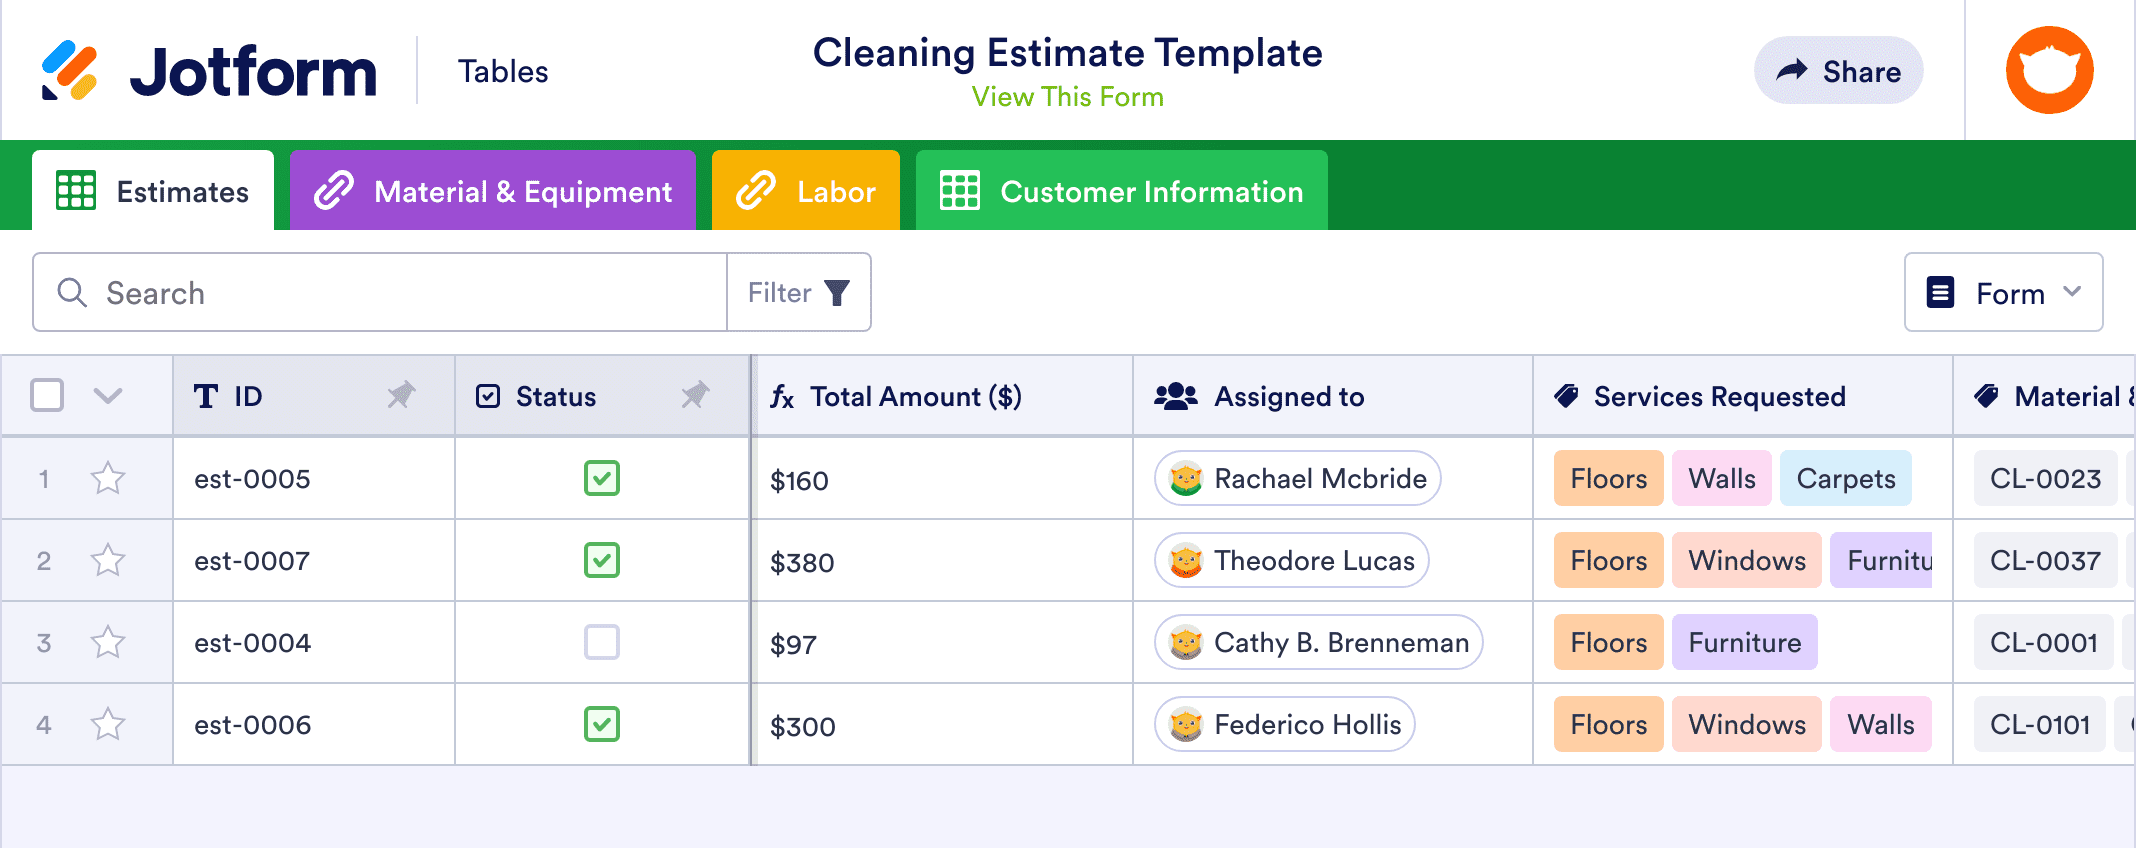 Cleaning Estimate Template